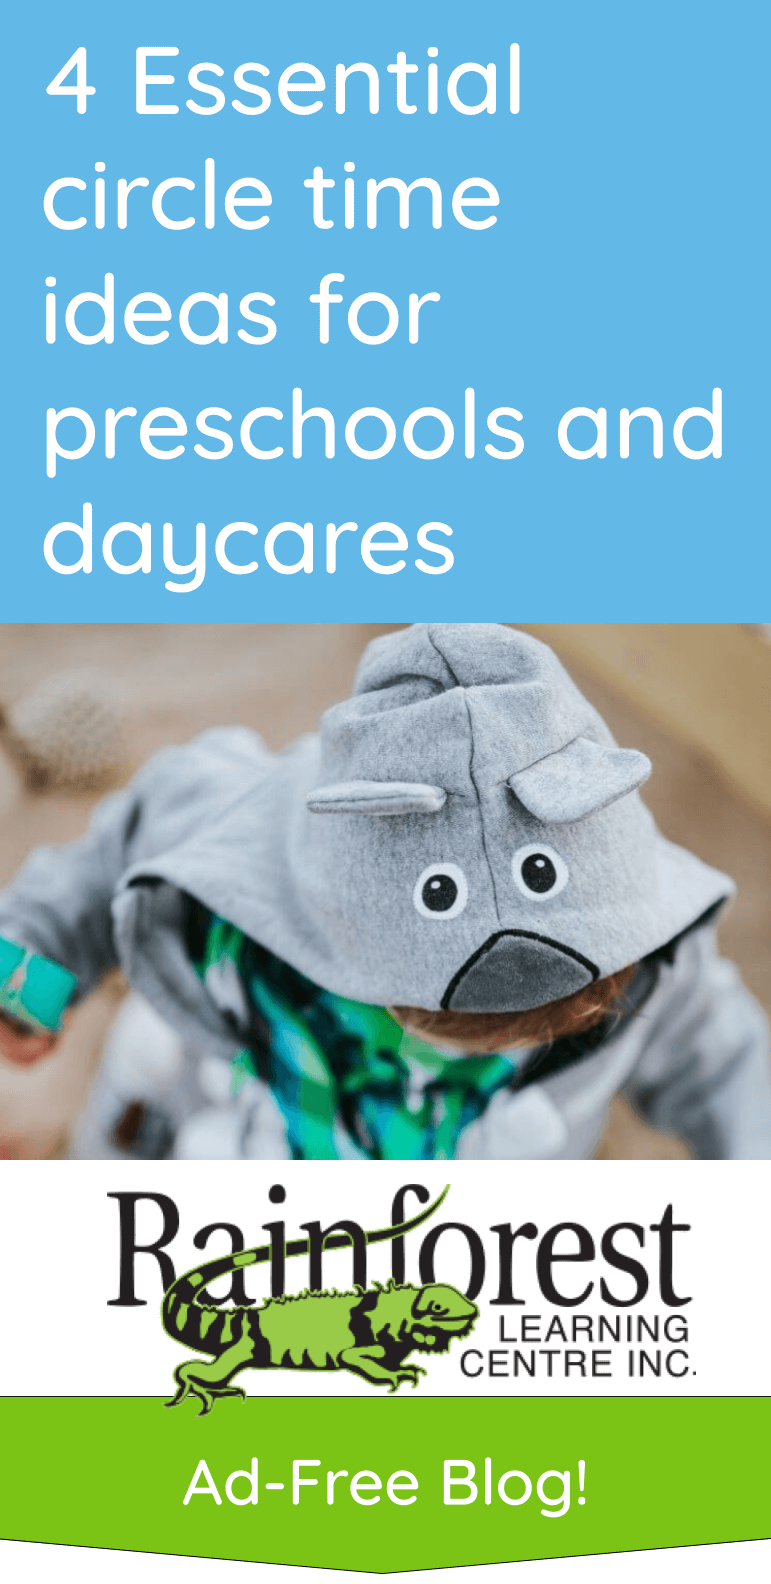 4 Essential circle time ideas for preschools and daycares - article pinterest image